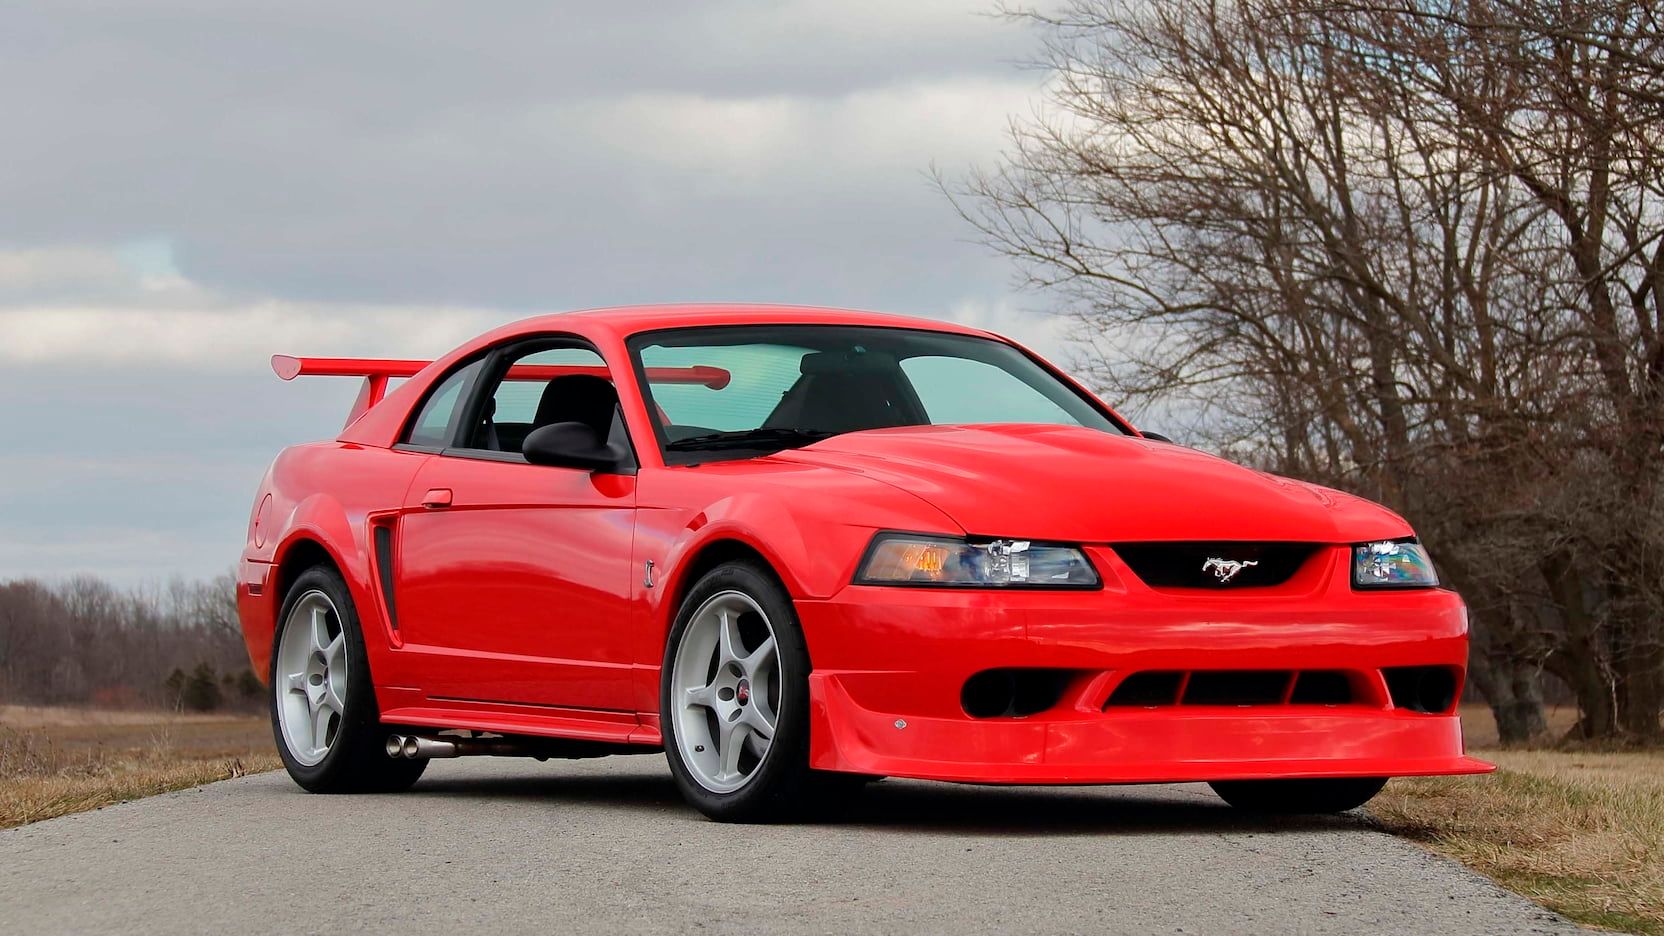 2000 Ford Mustang Cobra R parked at a 3/4 view